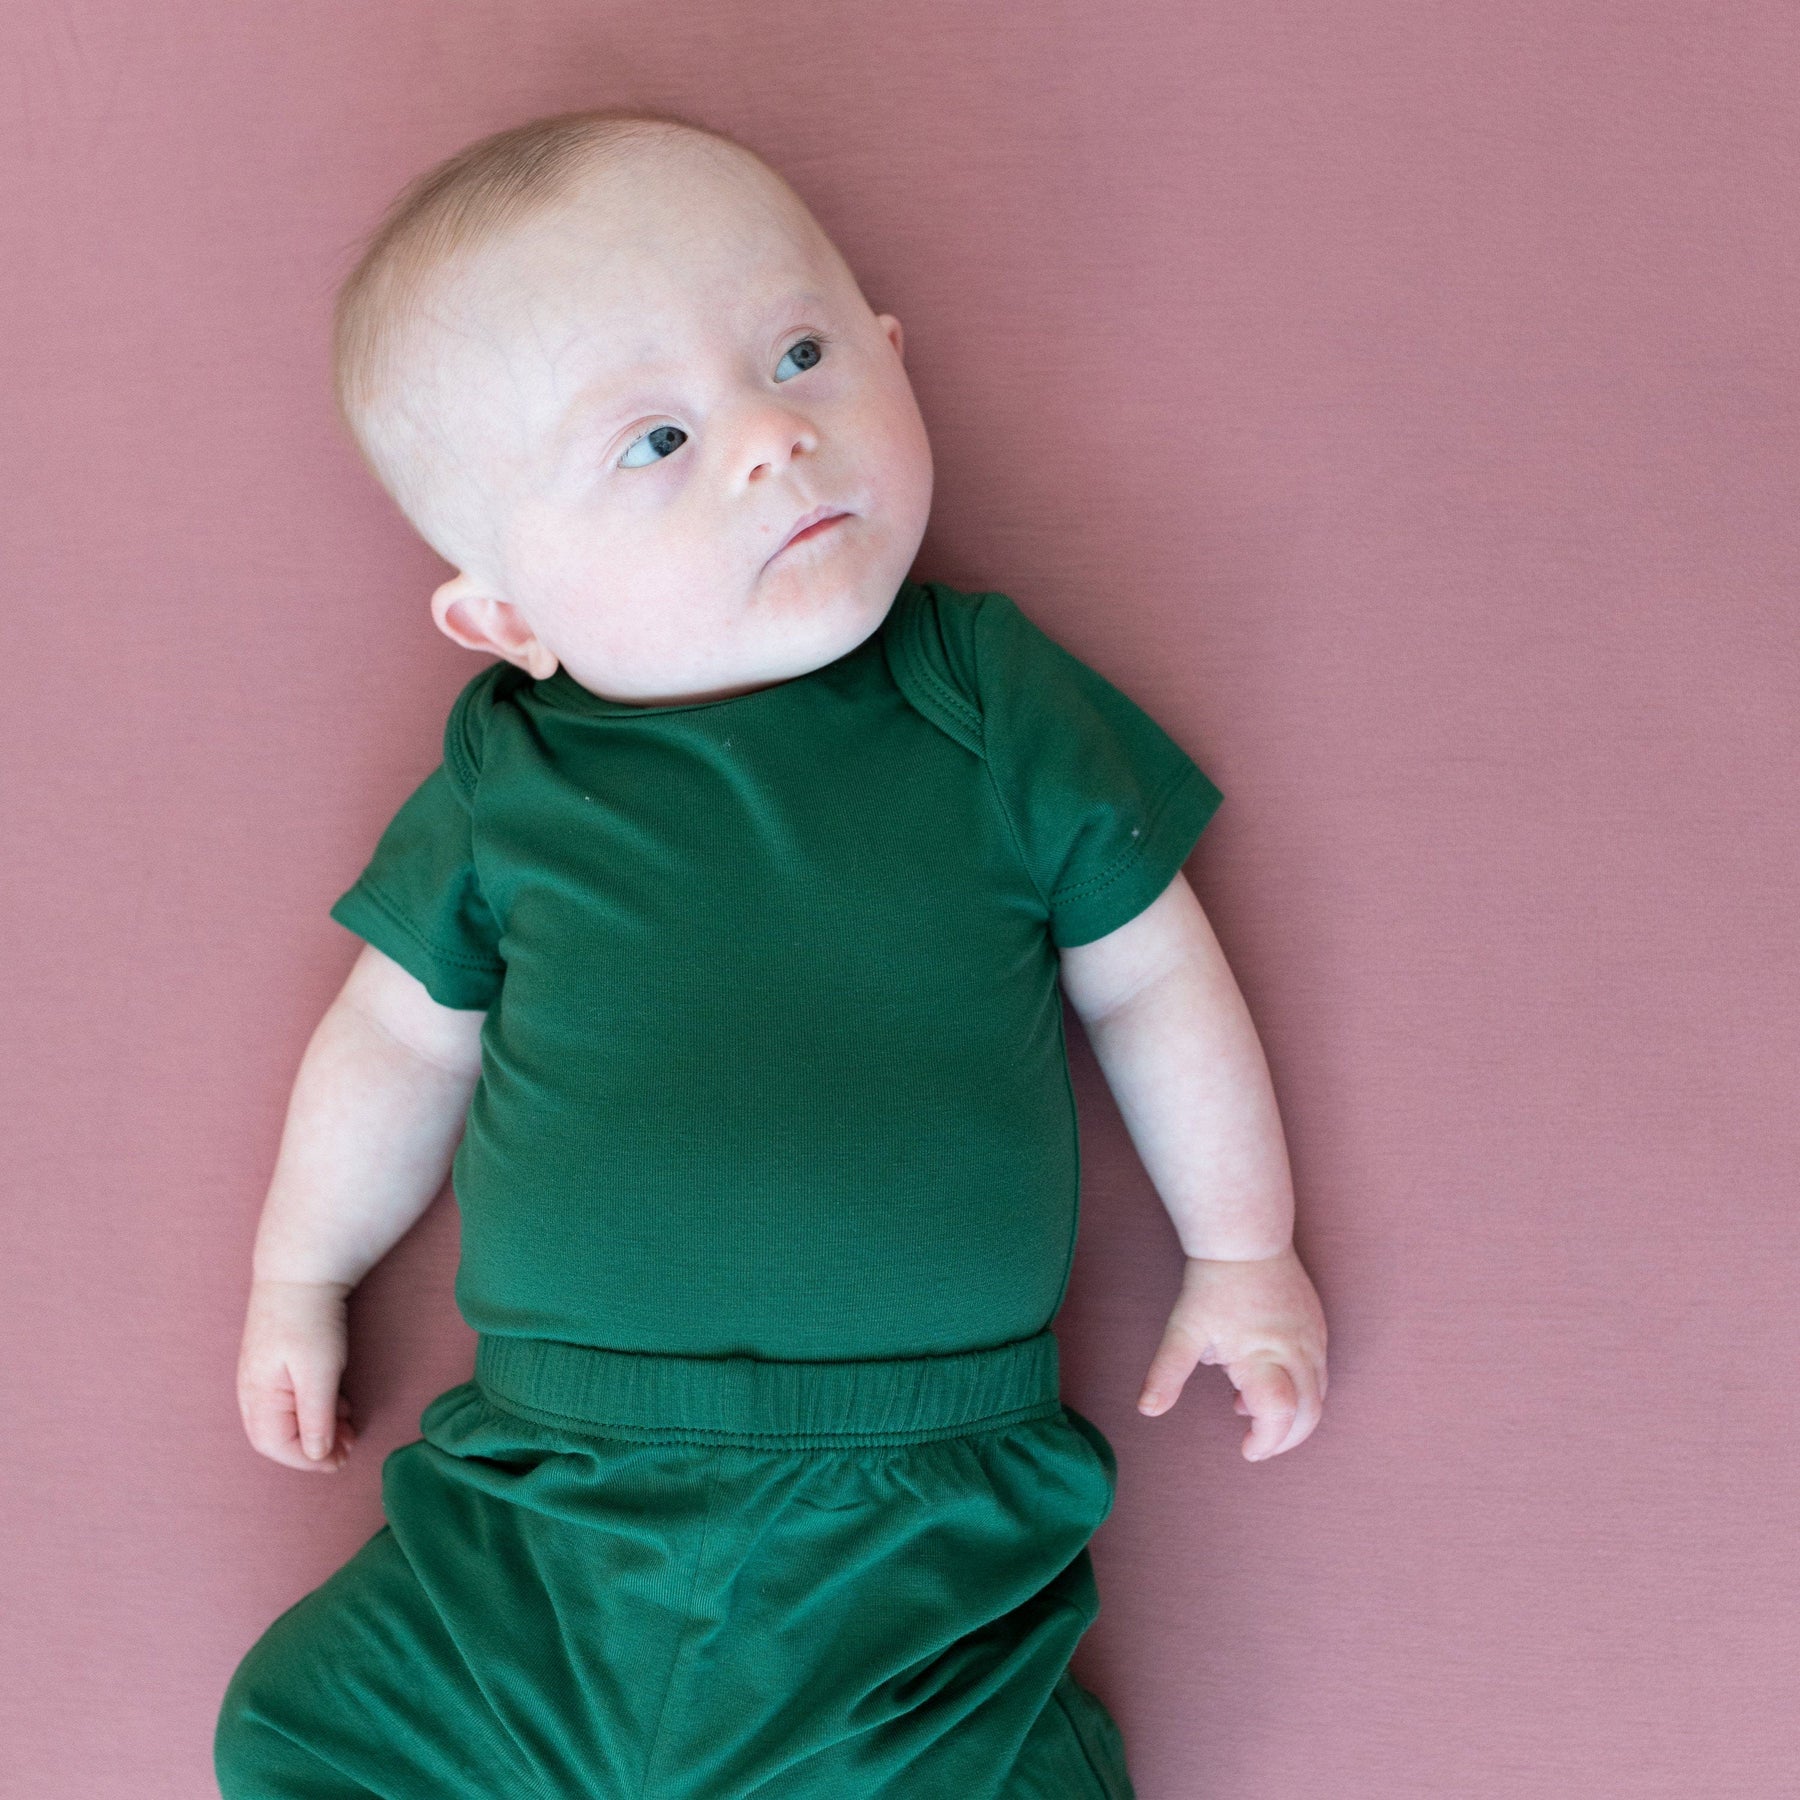 Kyte Baby Pants Pant in Forest